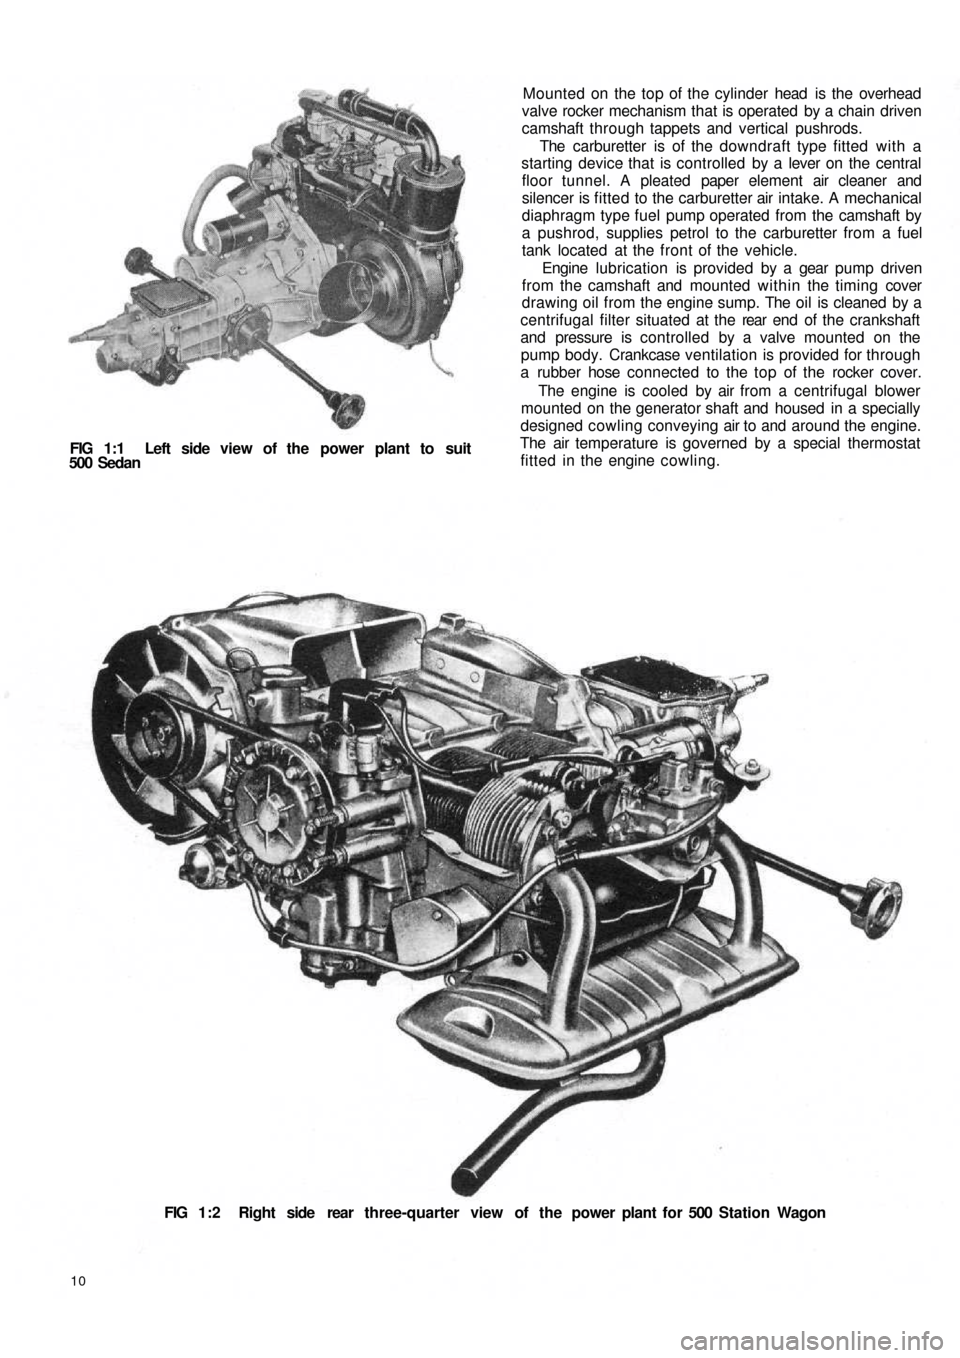 FIAT 500 1961 1.G Workshop Manual FIG 1:1  Left side view of the power plant to suit
500  Sedan
10
FIG 1:2  Right side  rear  three-quarter view of the power plant for 500 Station  Wagon Mounted on the top of the cylinder  head  is th